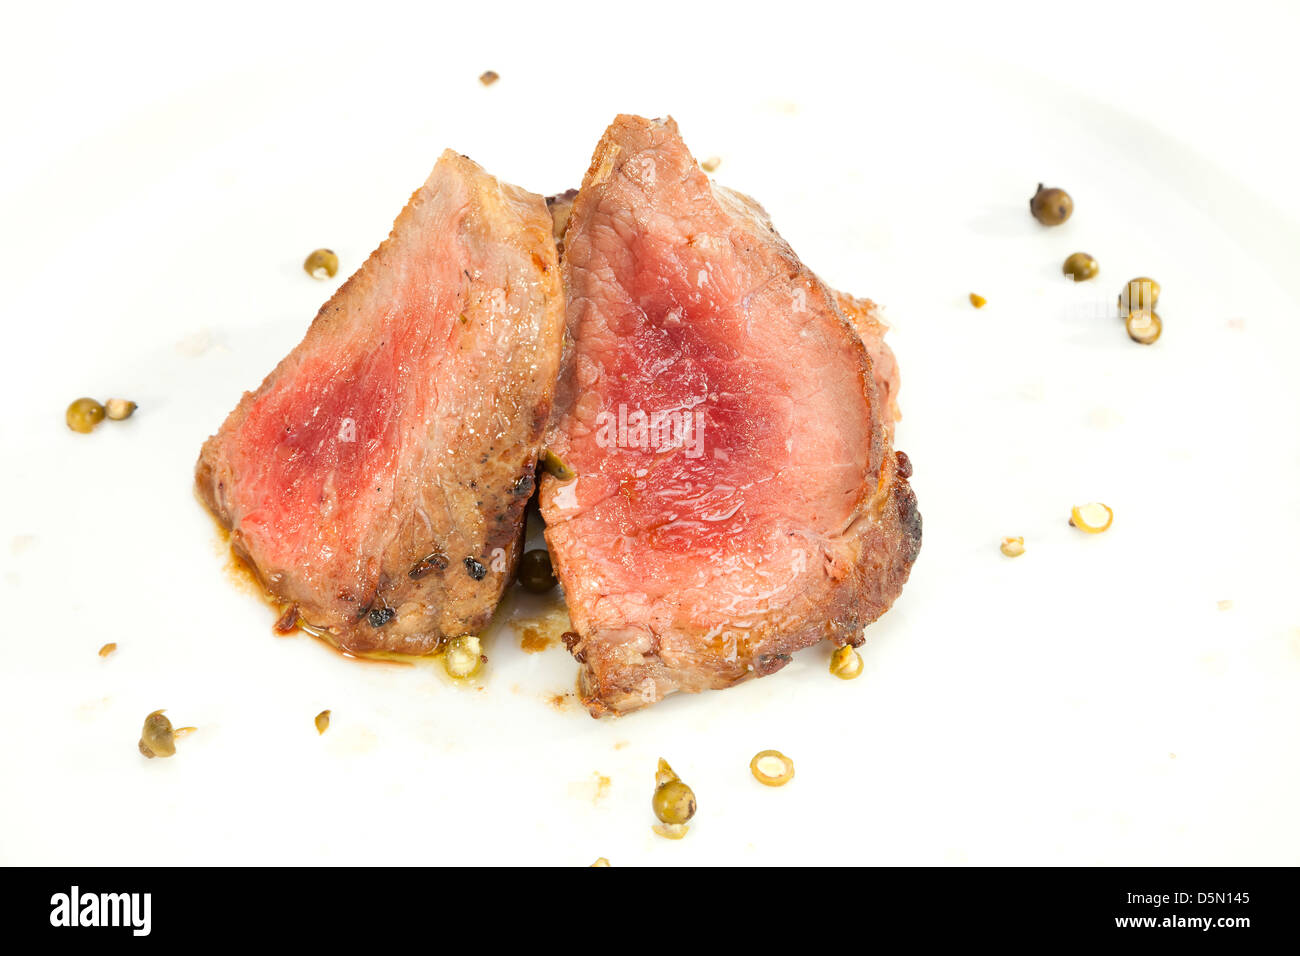 Grilled Sirloin with green pepper Stock Photo